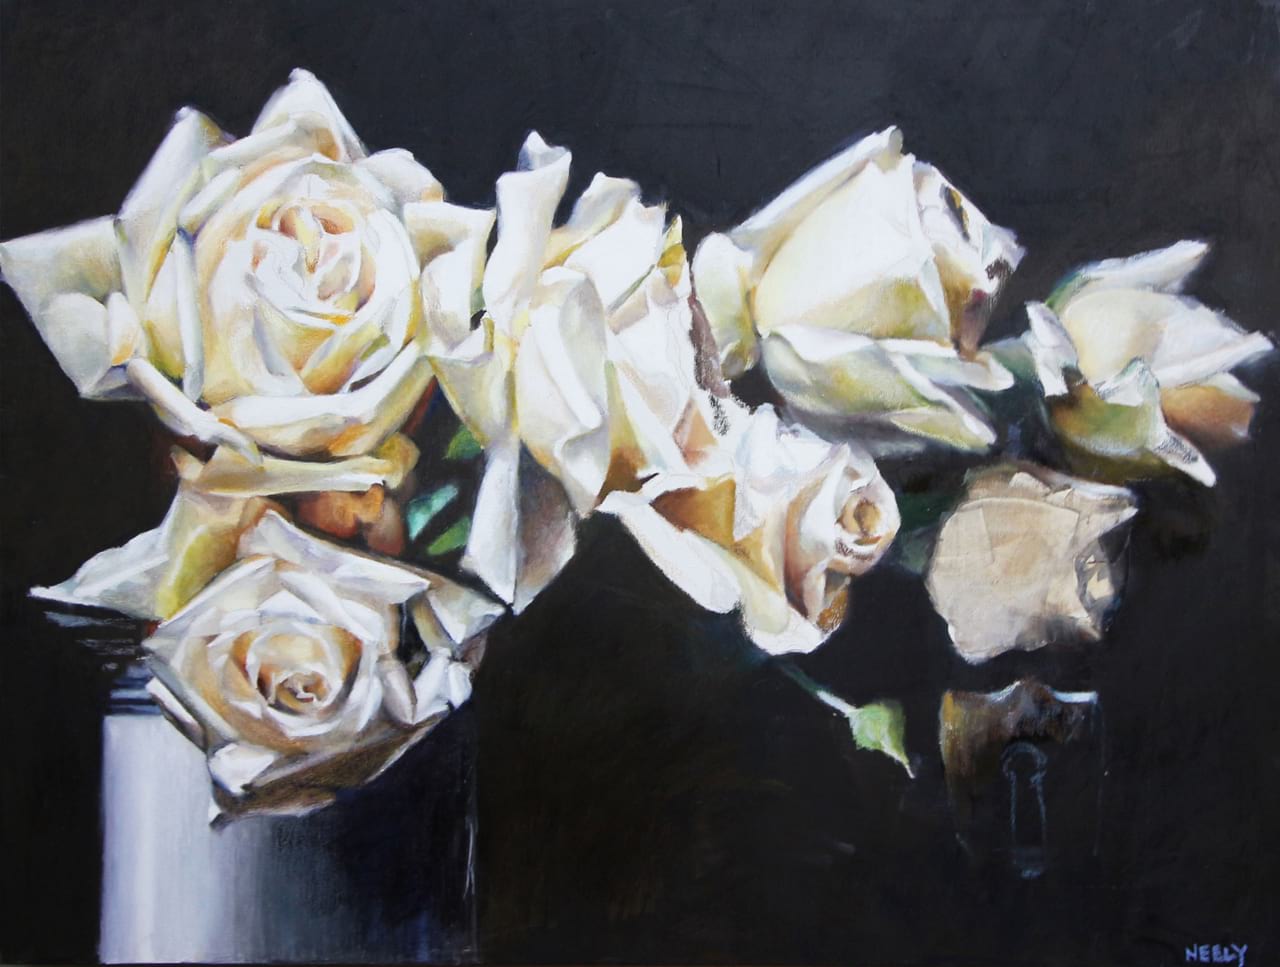 Oil pastel on canvas painting of white flowers by Stephanie Neely